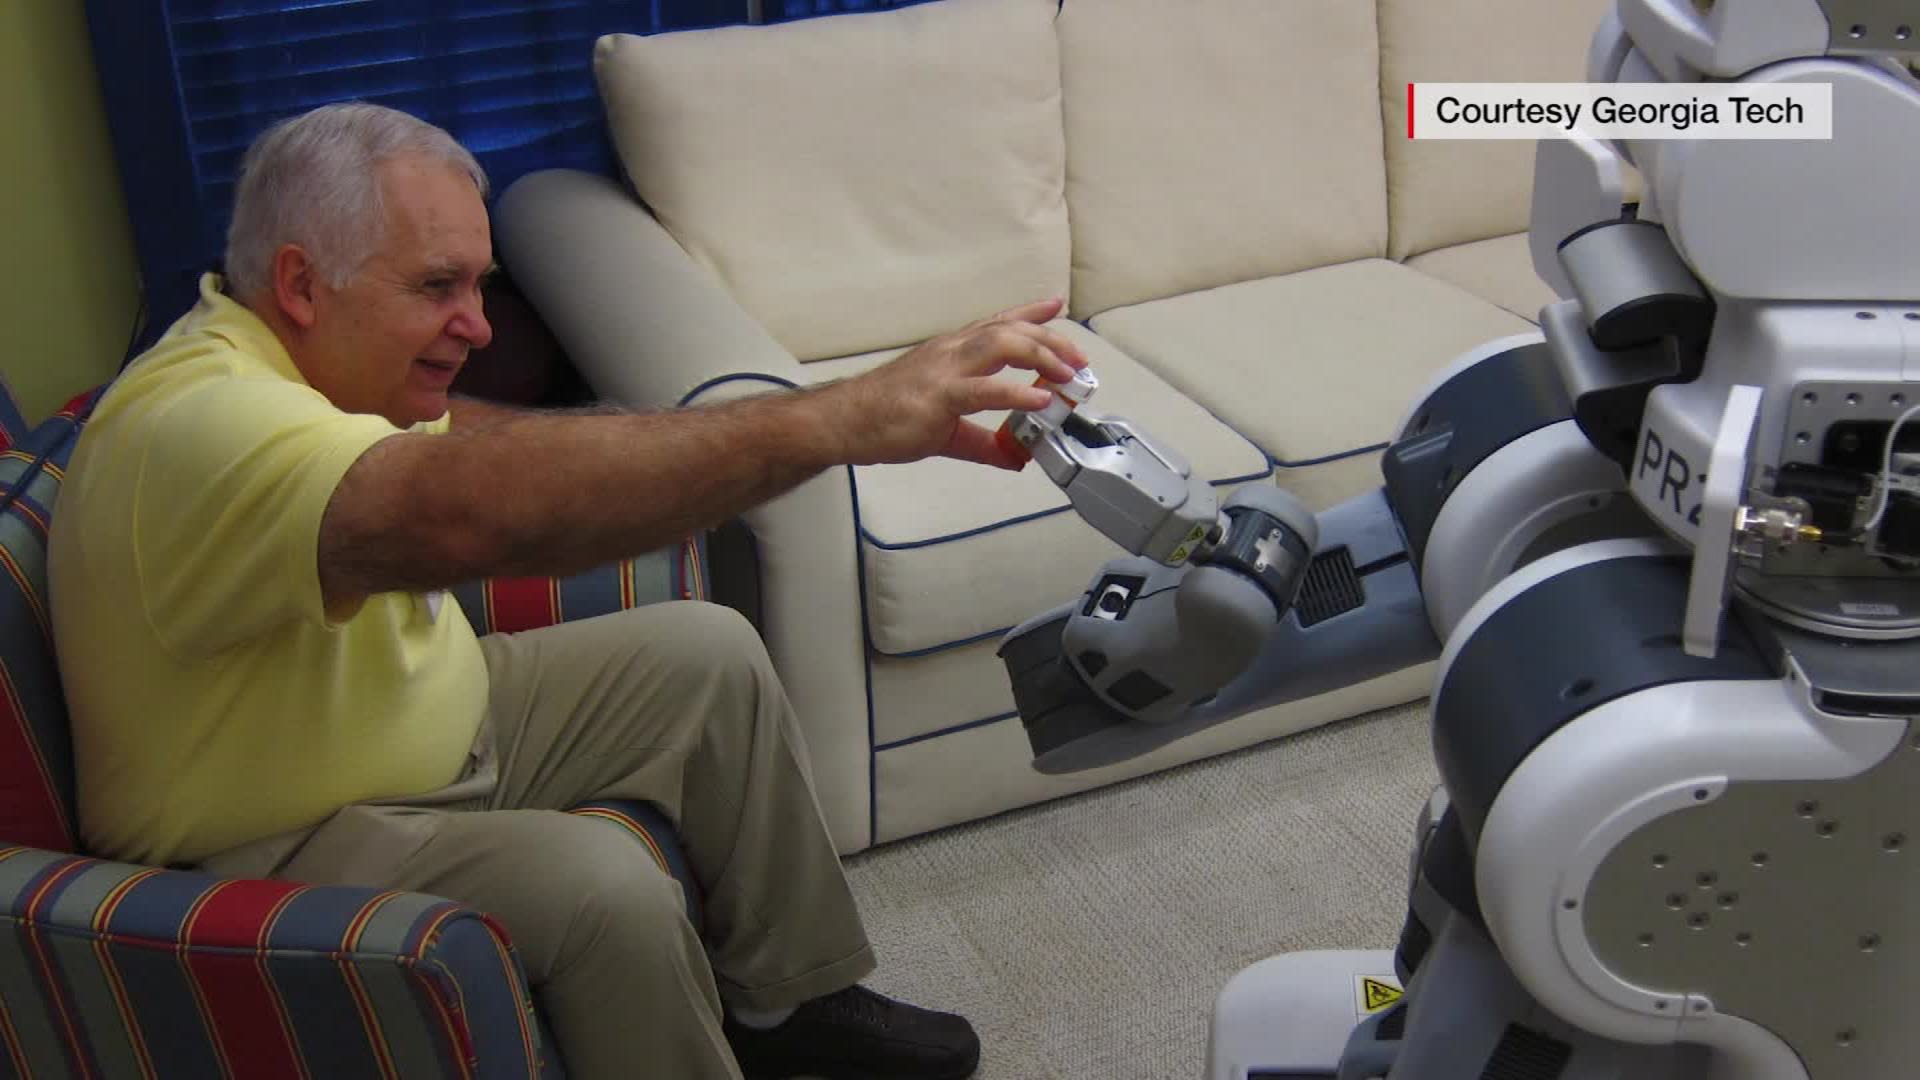 Into the Future: Gadgets and Tech for Independent Elderly